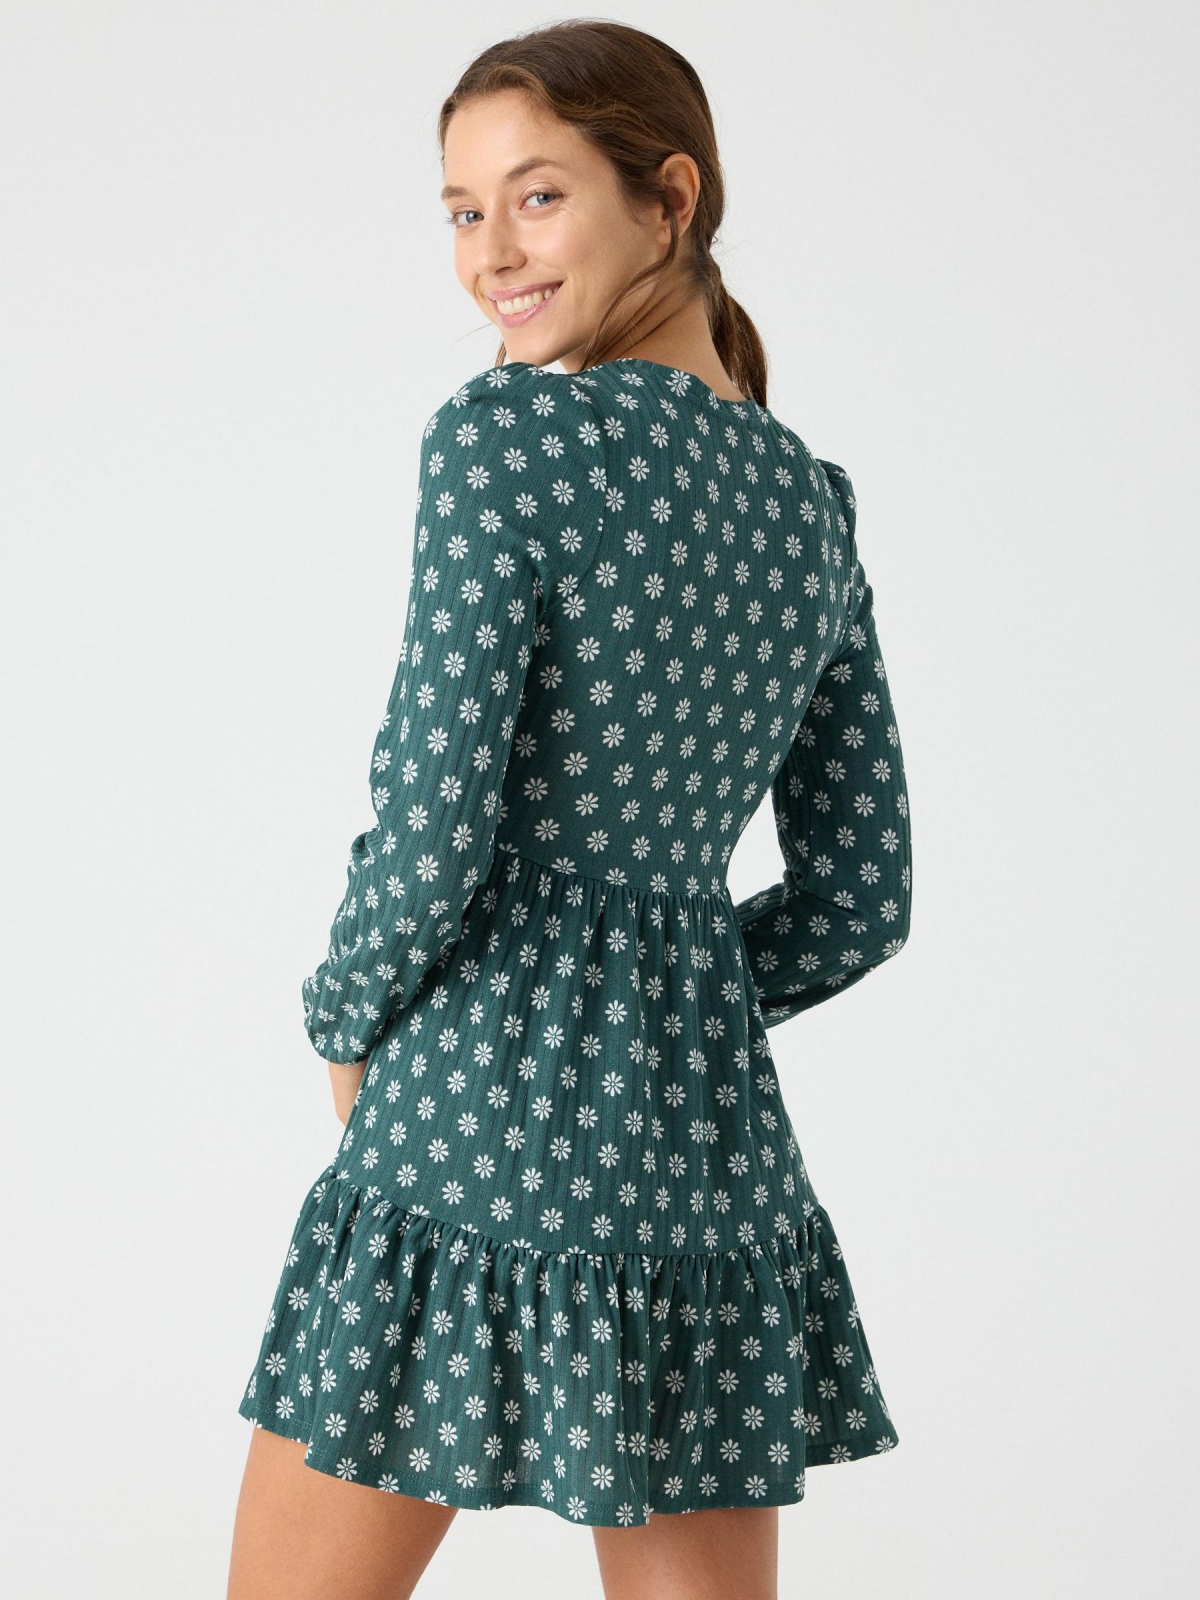 Ribbed daisy print dress dark green middle back view